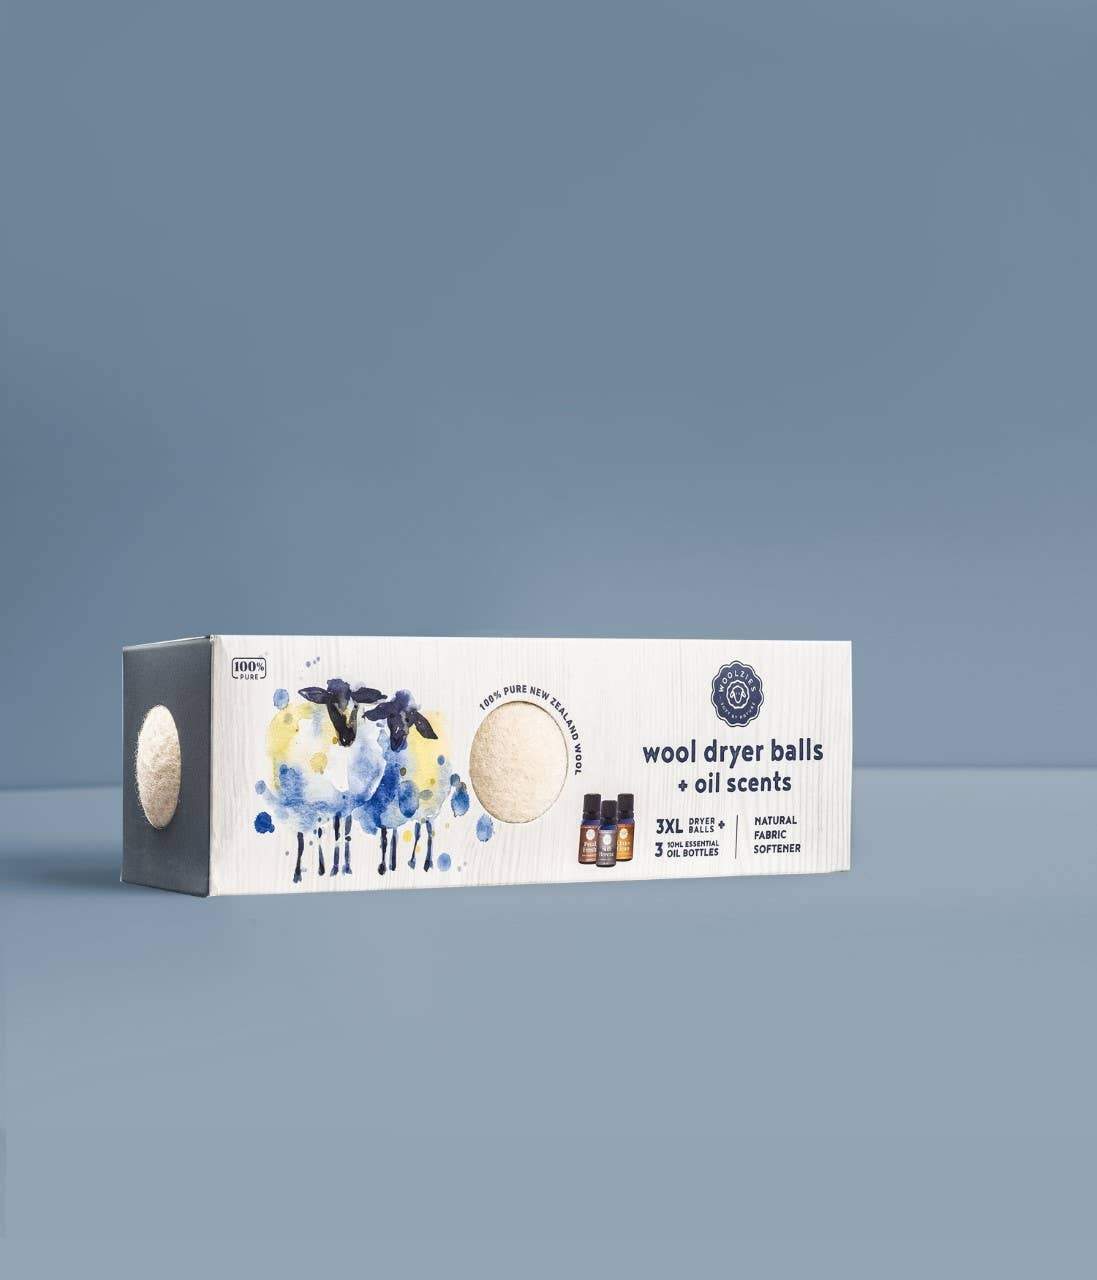 A package of Woolzies Wool Dryer Balls Set of 3 + 3 Laundry Essential oils displayed against a plain blue background, featuring artistic watercolor illustrations of sheep and essential oil bottles.